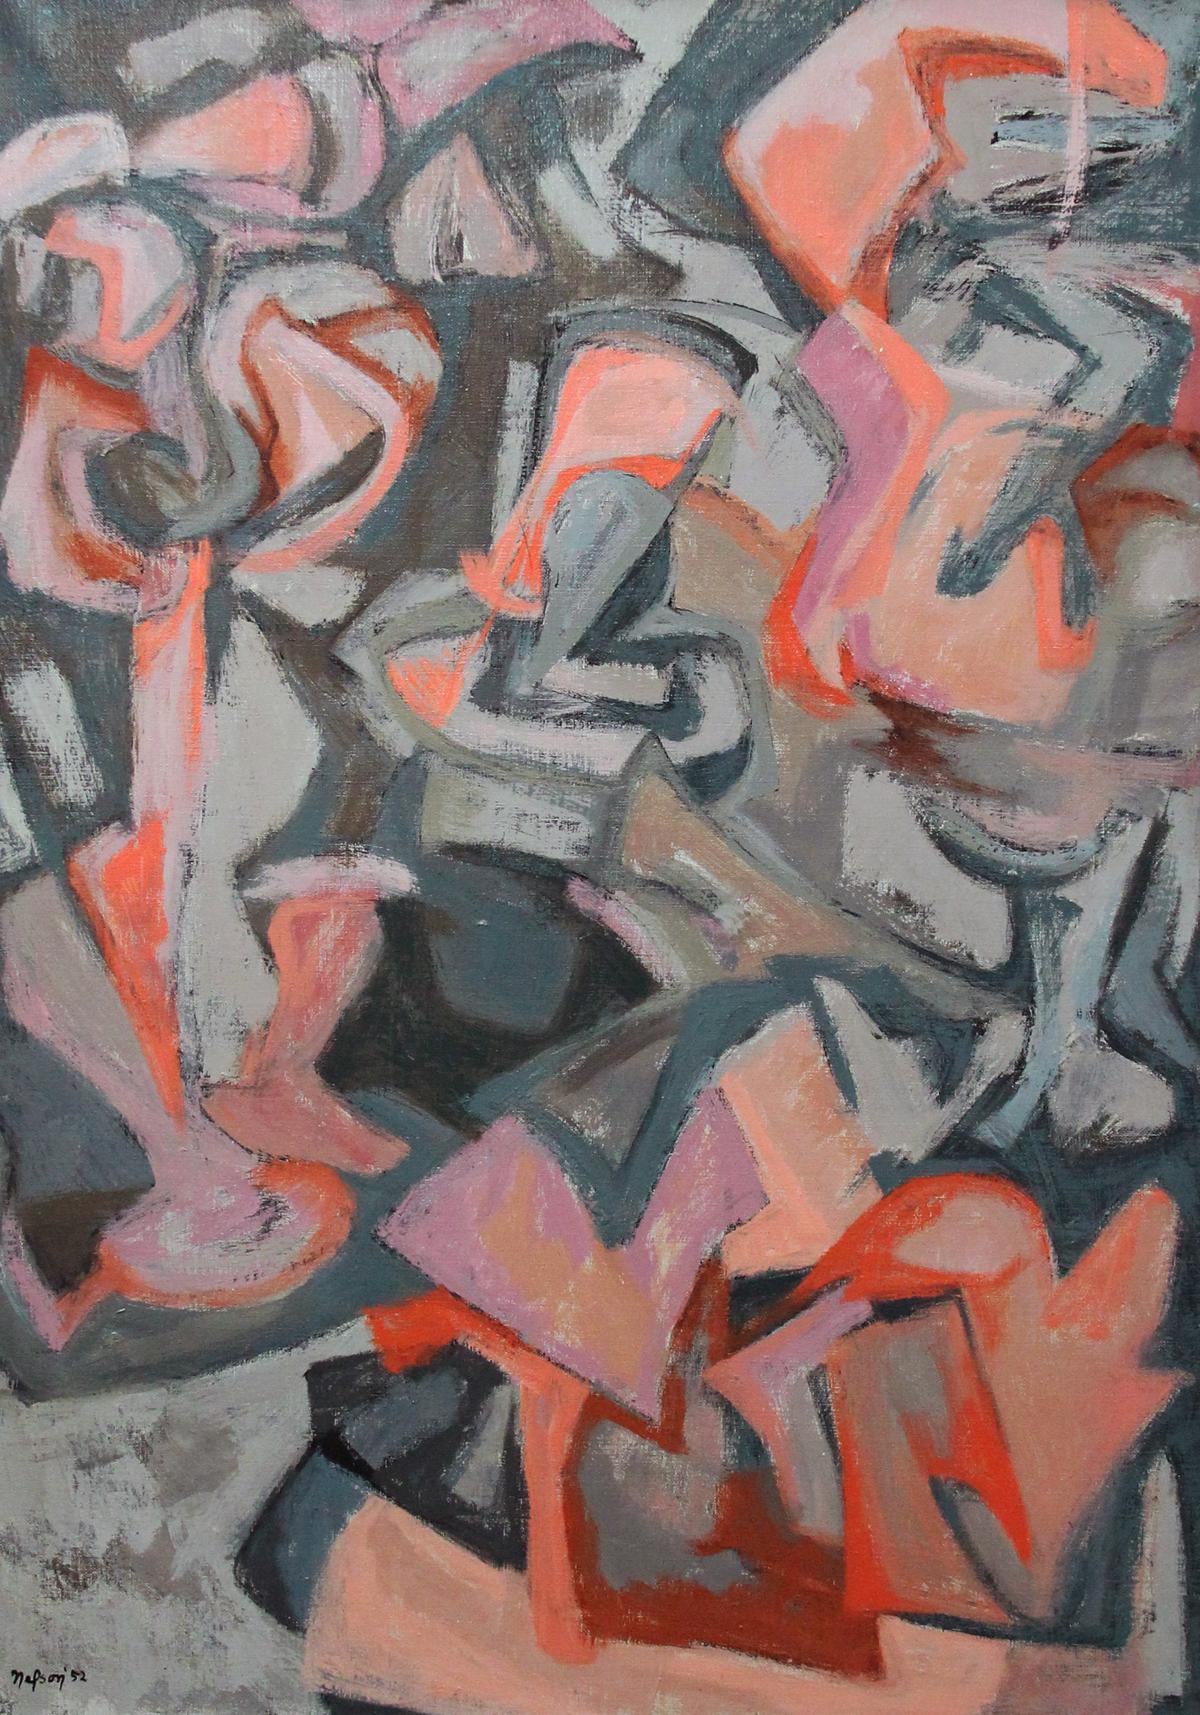 Les Competiteurs, American Modernist, Abstract Figurative Oil on Canvas, 1952 - Painting by Leonard Nelson